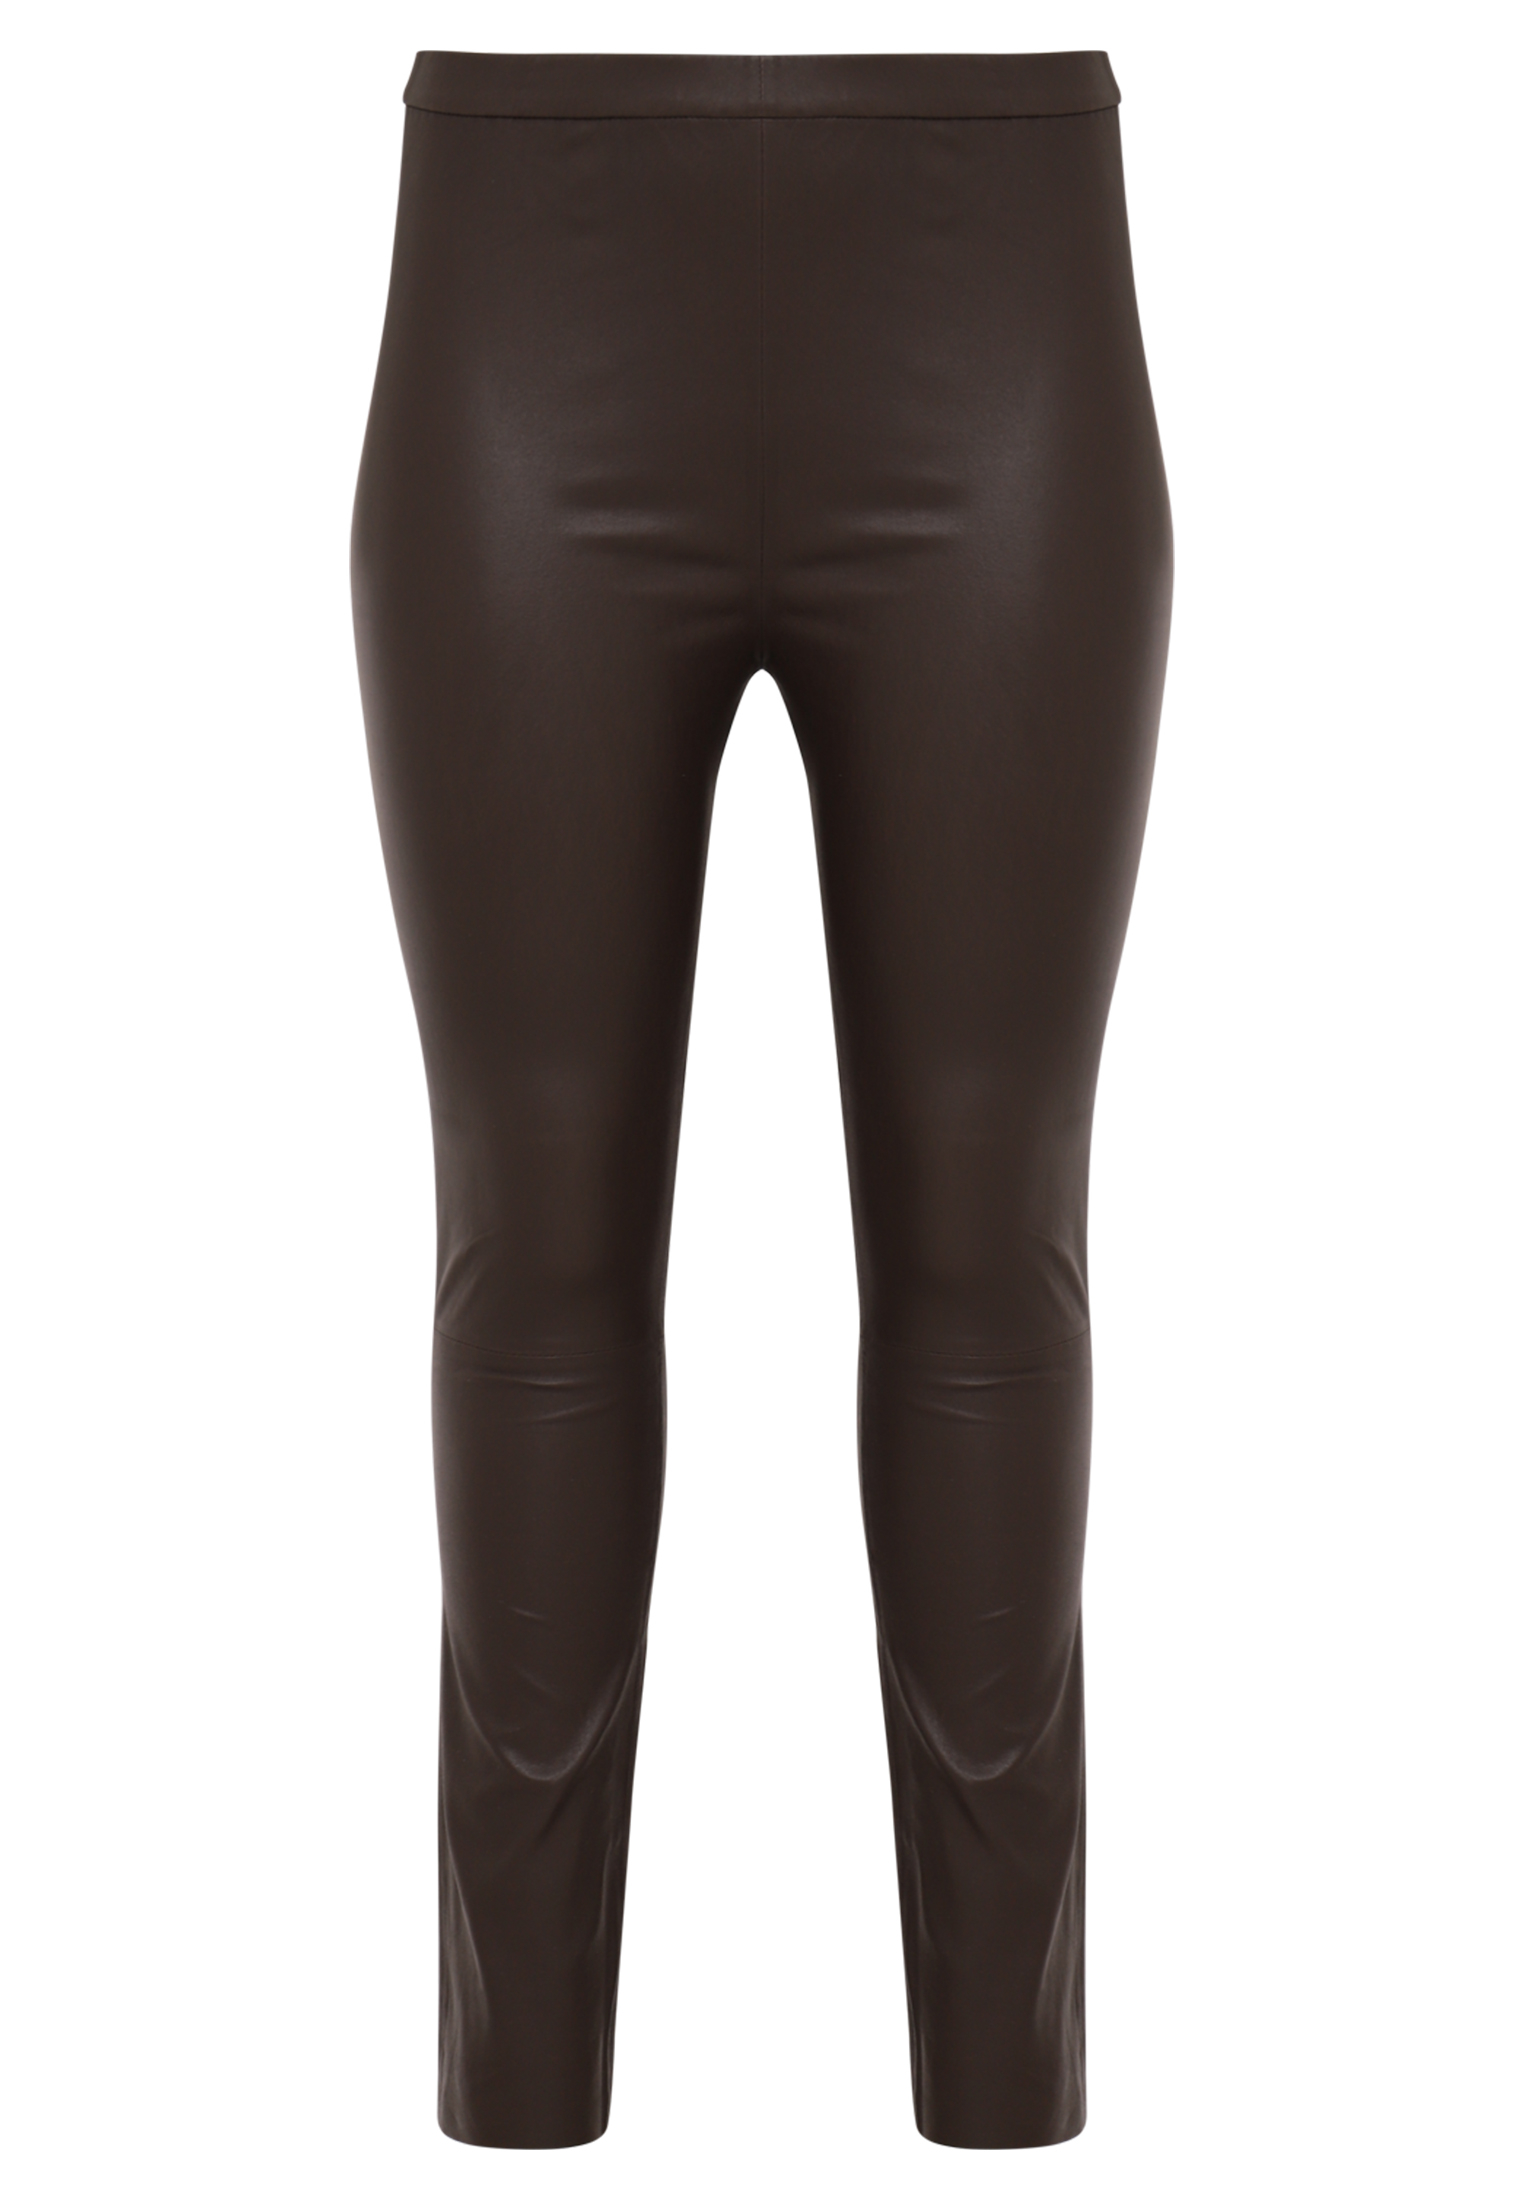 Legging full stretch leather - black green red mid brown brown